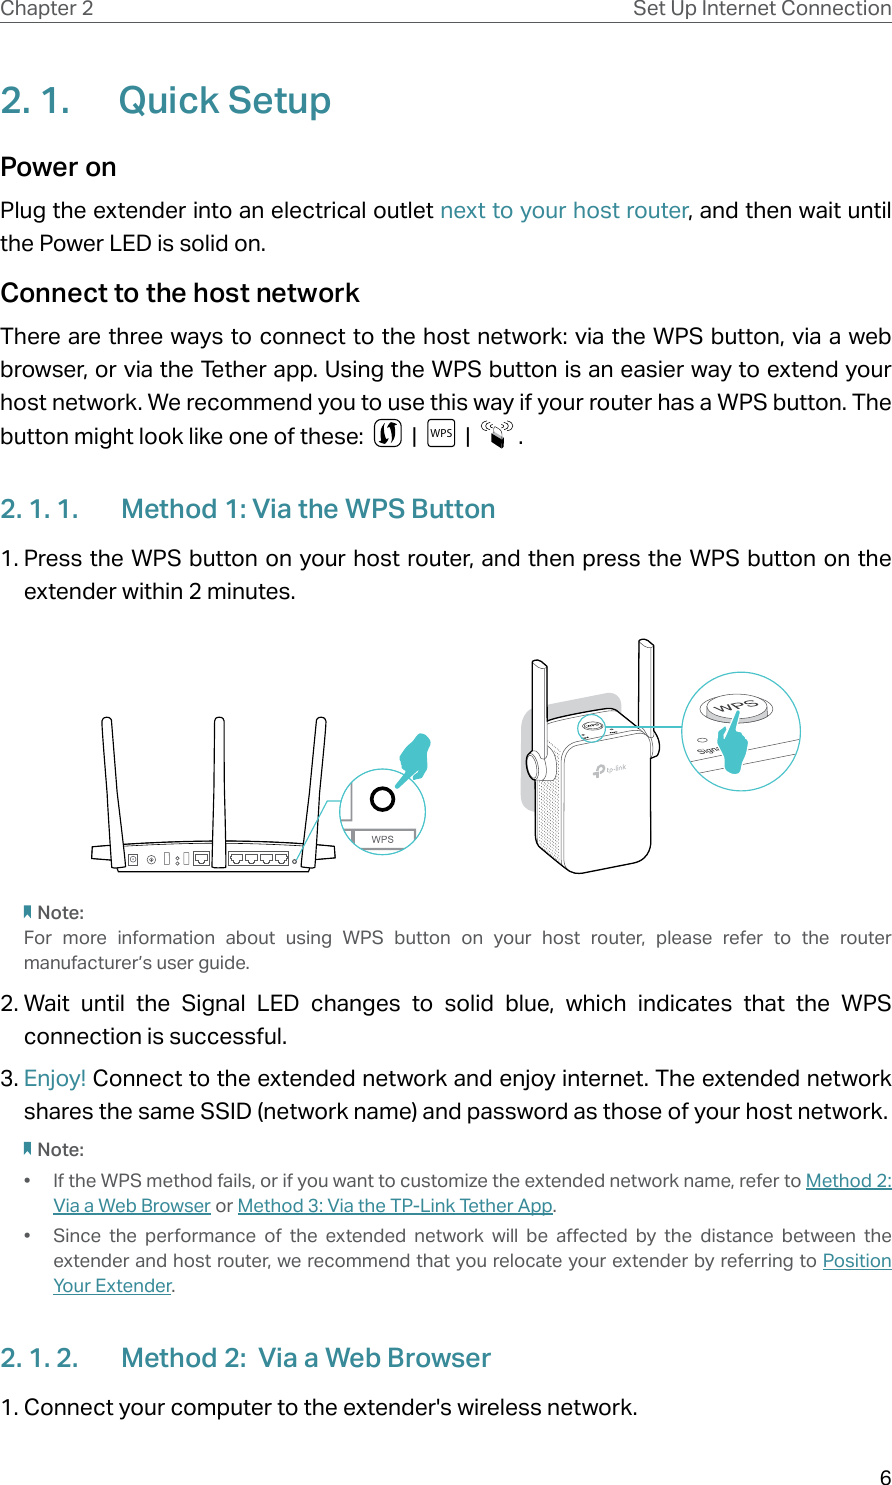 6Chapter 2 Set Up Internet Connection2. 1.  Quick SetupPower on Plug the extender into an electrical outlet next to your host router, and then wait until the Power LED is solid on.Connect to the host network There are three ways to connect to the host network: via the WPS button, via a web browser, or via the Tether app. Using the WPS button is an easier way to extend your host network. We recommend you to use this way if your router has a WPS button. The button might look like one of these:     |  WPS   |    .2. 1. 1.  Method 1: Via the WPS Button1. Press the WPS button on your host router, and then press the WPS button on the extender within 2 minutes.Note:For more information about using WPS button on your host router, please refer to the router manufacturer’s user guide.2. Wait until the Signal LED changes to solid blue, which indicates that the WPS connection is successful. 3. Enjoy! Connect to the extended network and enjoy internet. The extended network shares the same SSID (network name) and password as those of your host network.Note:•  If the WPS method fails, or if you want to customize the extended network name, refer to Method  2:  Via a Web Browser or Method 3: Via the TP-Link Tether App.•  Since the performance of the extended network will be affected by the distance between the extender and host router, we recommend that you relocate your extender by referring to Position Your Extender.2. 1. 2.  Method 2:  Via a Web Browser1. Connect your computer to the extender&apos;s wireless network.